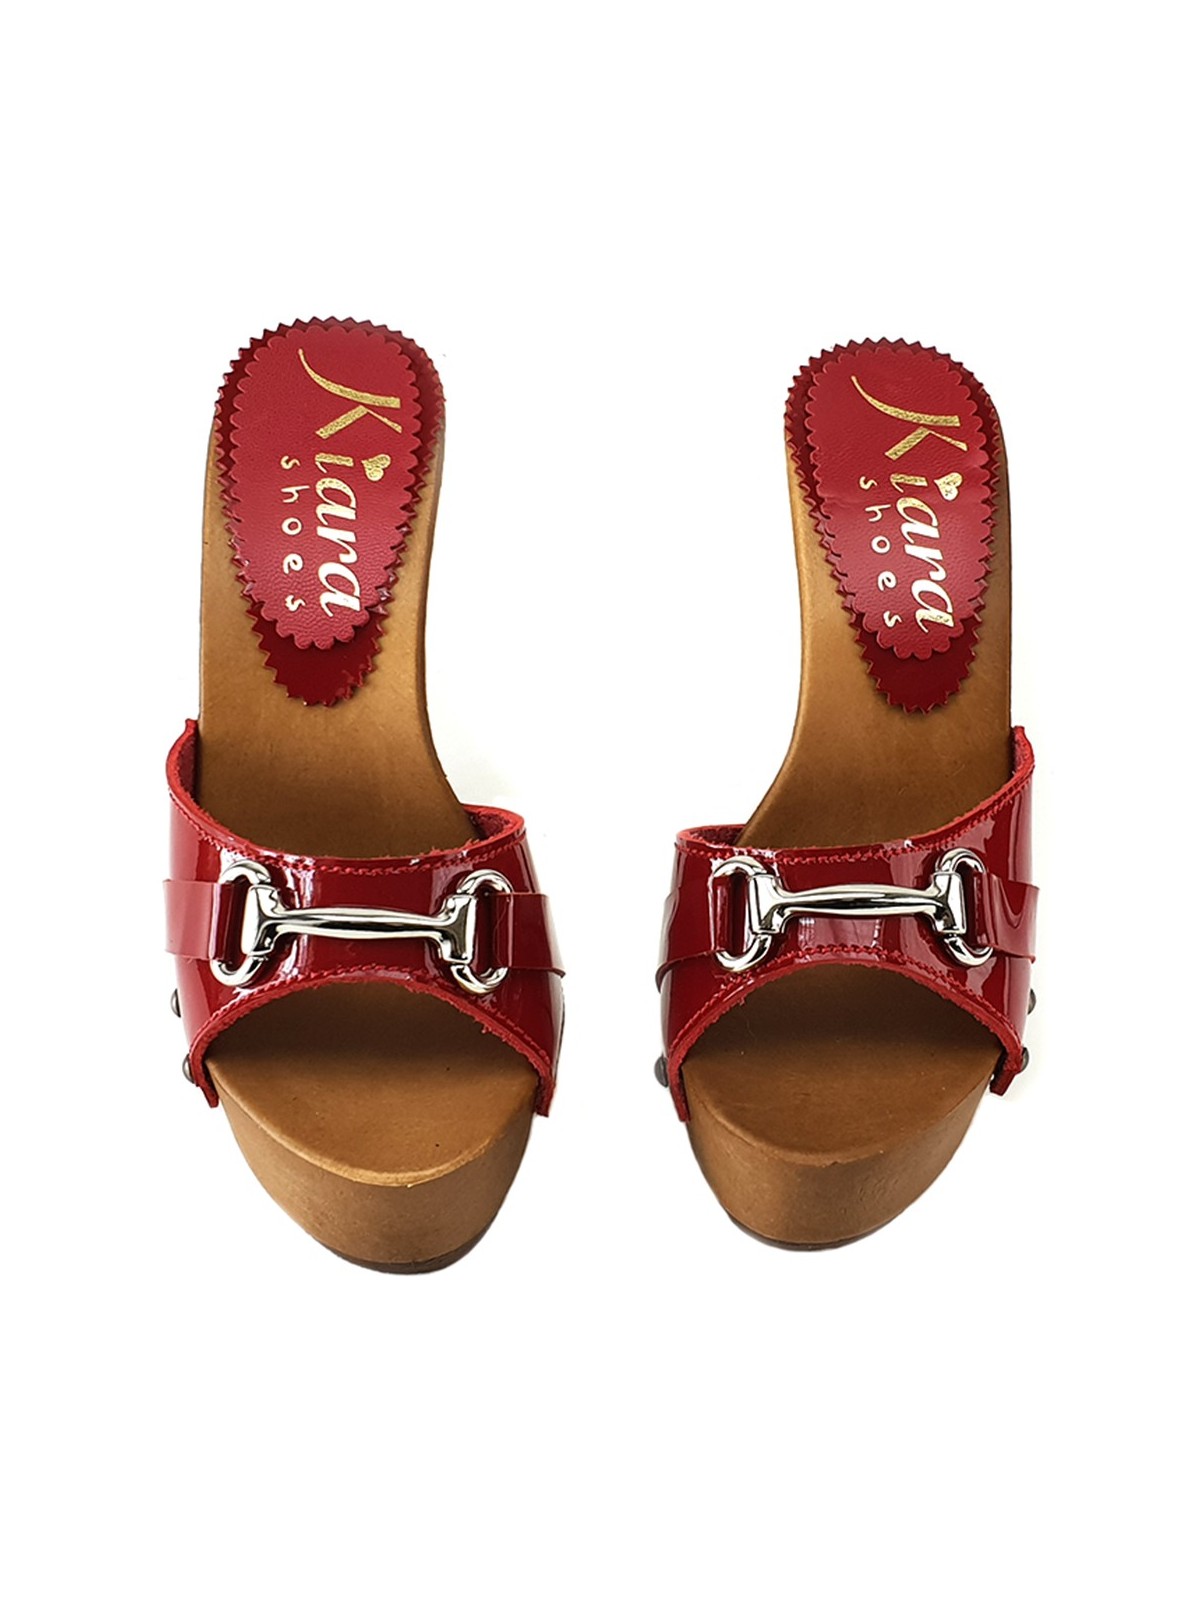 CLOGS WITH RED PATENT LEATHER UPPER